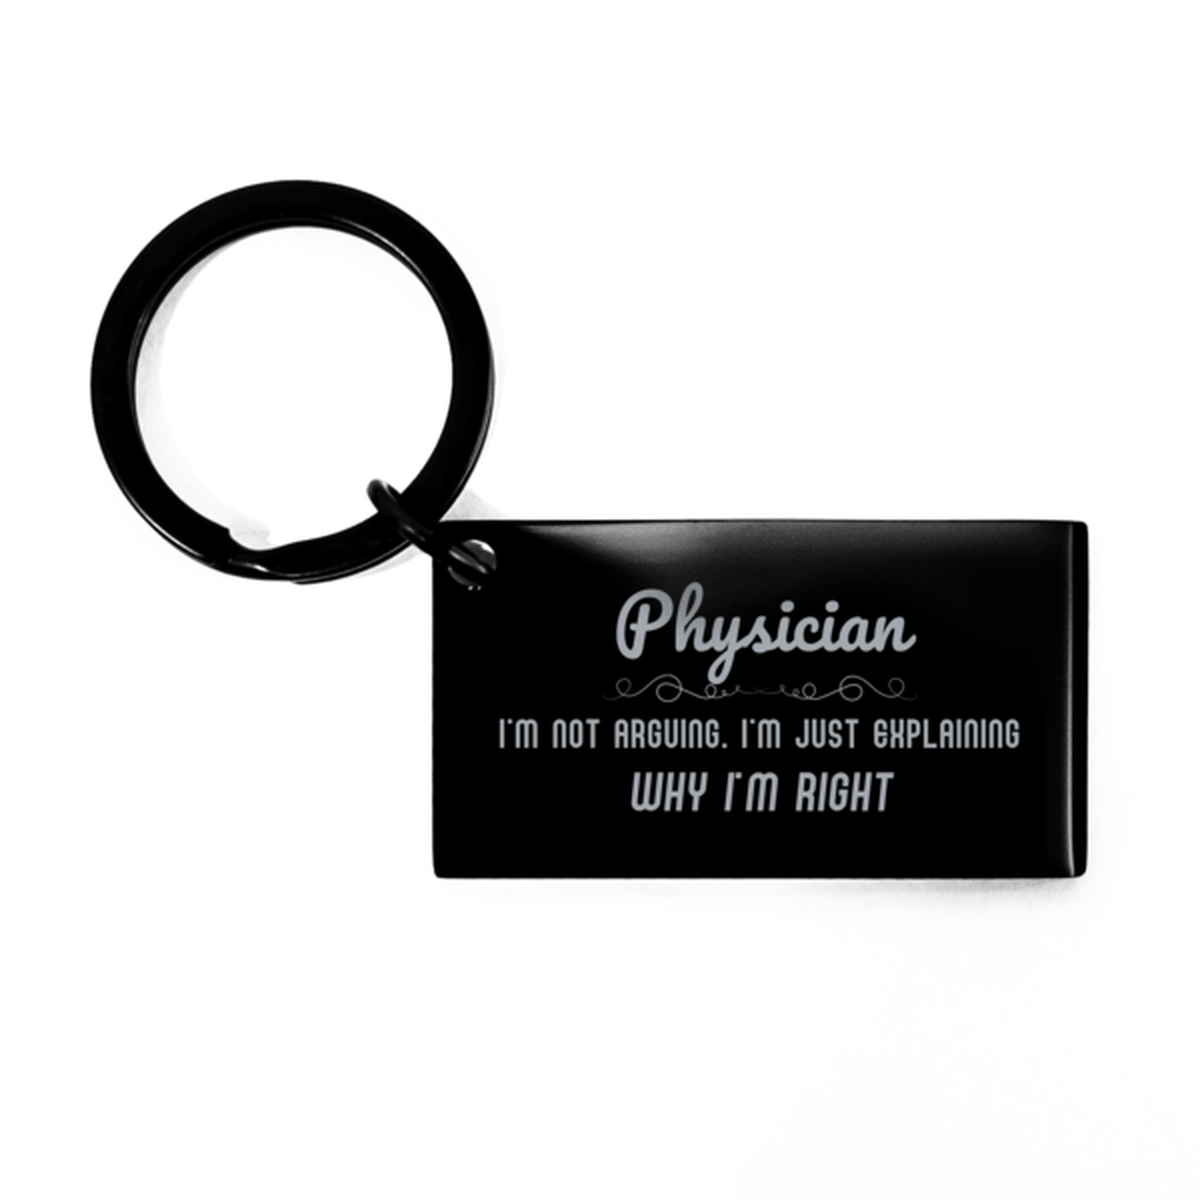 Physician I'm not Arguing. I'm Just Explaining Why I'm RIGHT Keychain, Funny Saying Quote Physician Gifts For Physician Graduation Birthday Christmas Gifts for Men Women Coworker